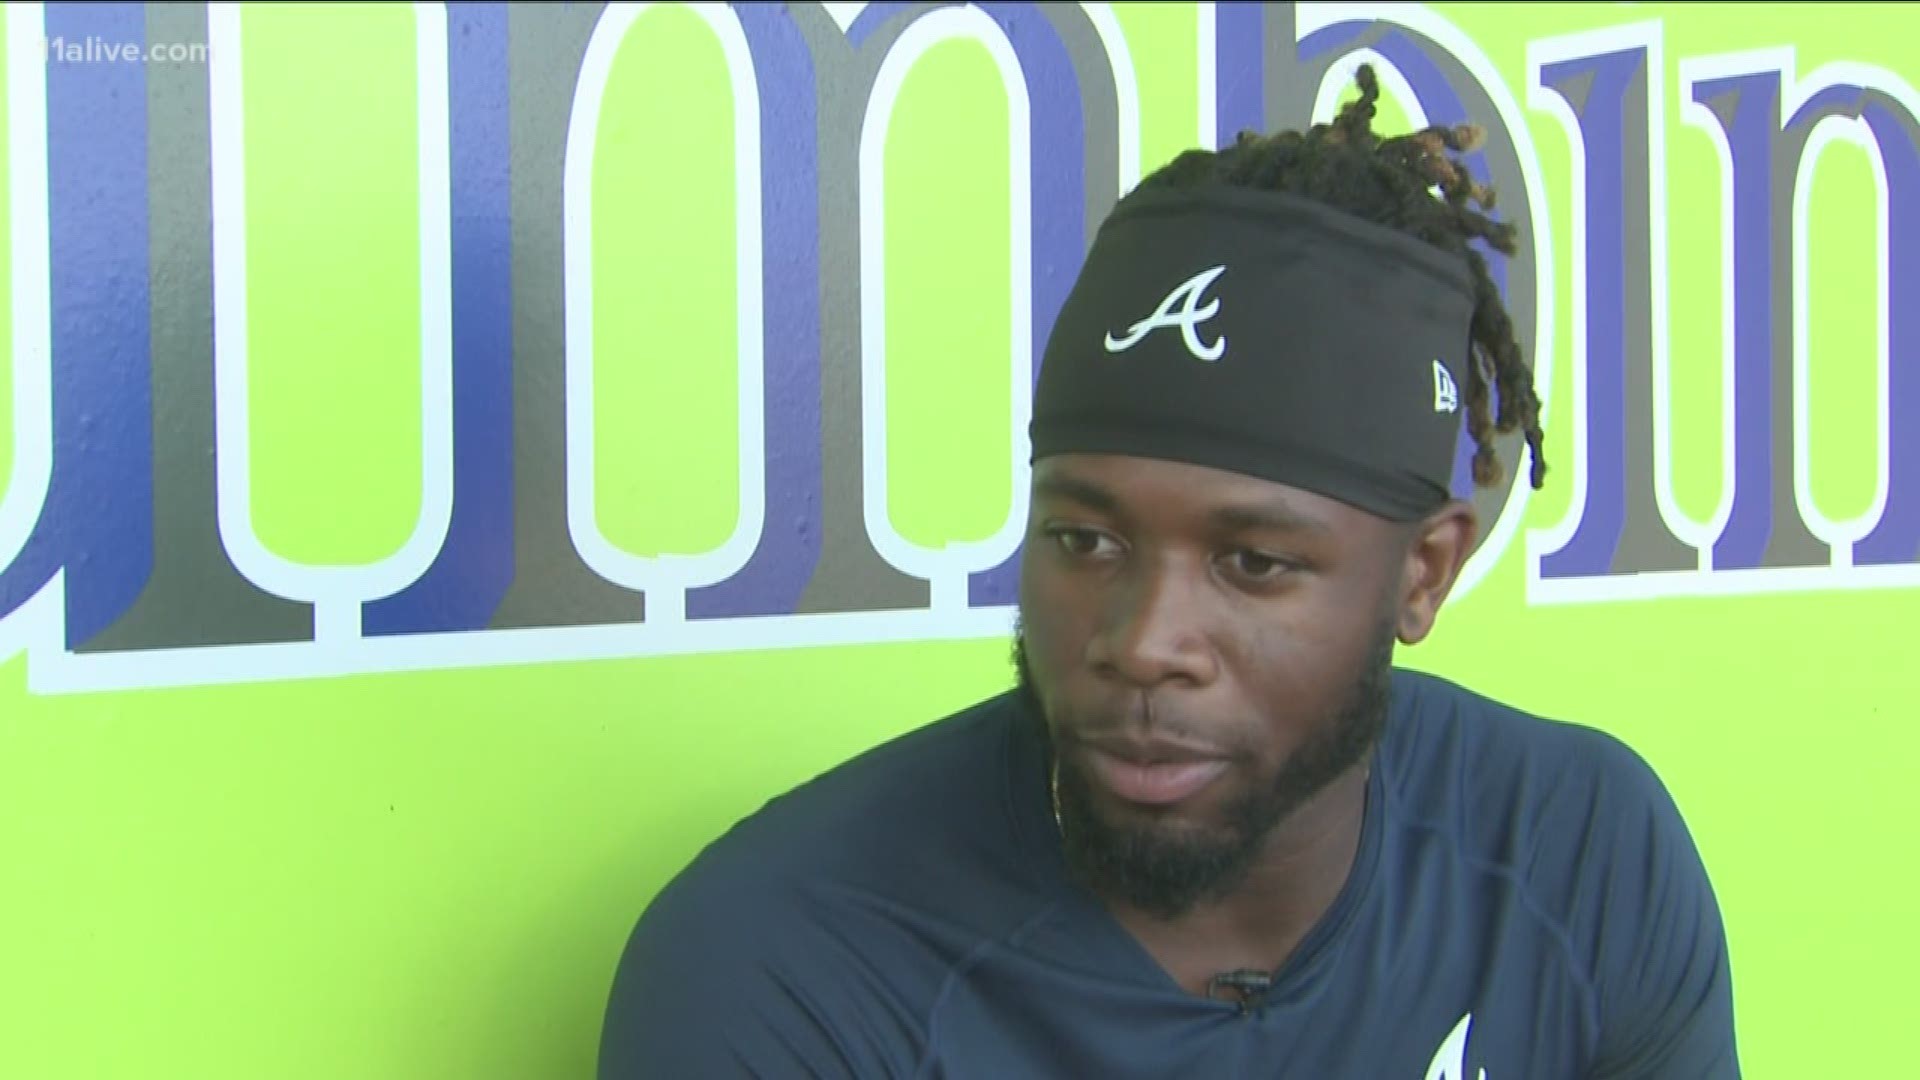 11Alive's Maria Martin sat down with Toussaint to talk about what he's doing to make it into the rotation.